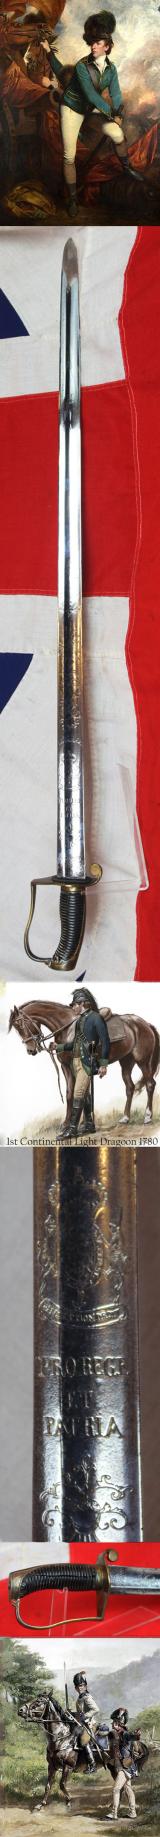 Rare English Light Dragoon Officer's Sword 1773, of the American Revolutionary War, Used By Both American and British Dragoon Regiments.